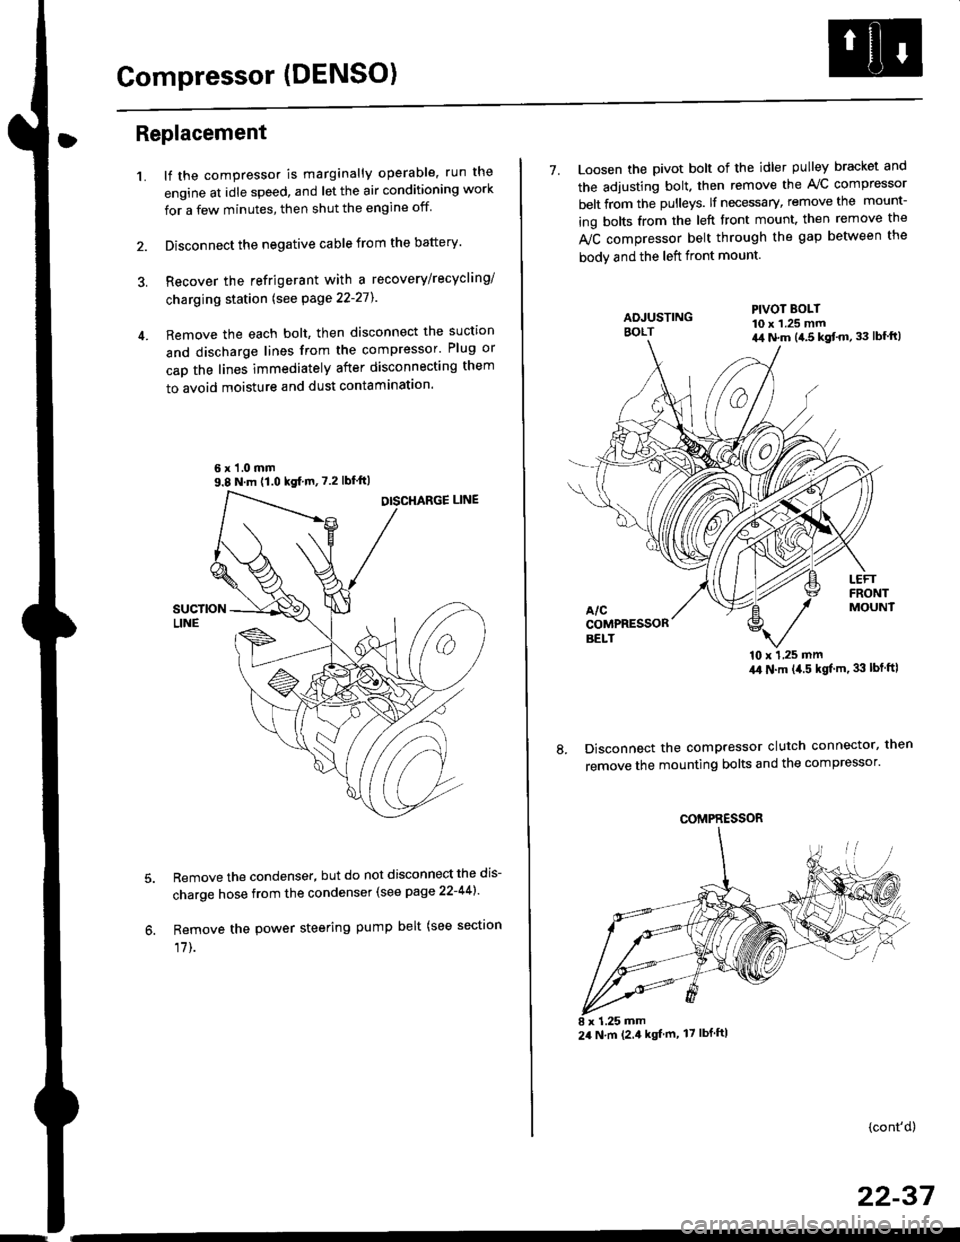 HONDA CIVIC 1998 6.G Service Manual Compressor (DENSO)
Replacement
1.lf the compressor is marginally operable, run the
engine at idle speed, and let the air conditioning work
for a few minutes, then shut the engine off
Disconnect the ne